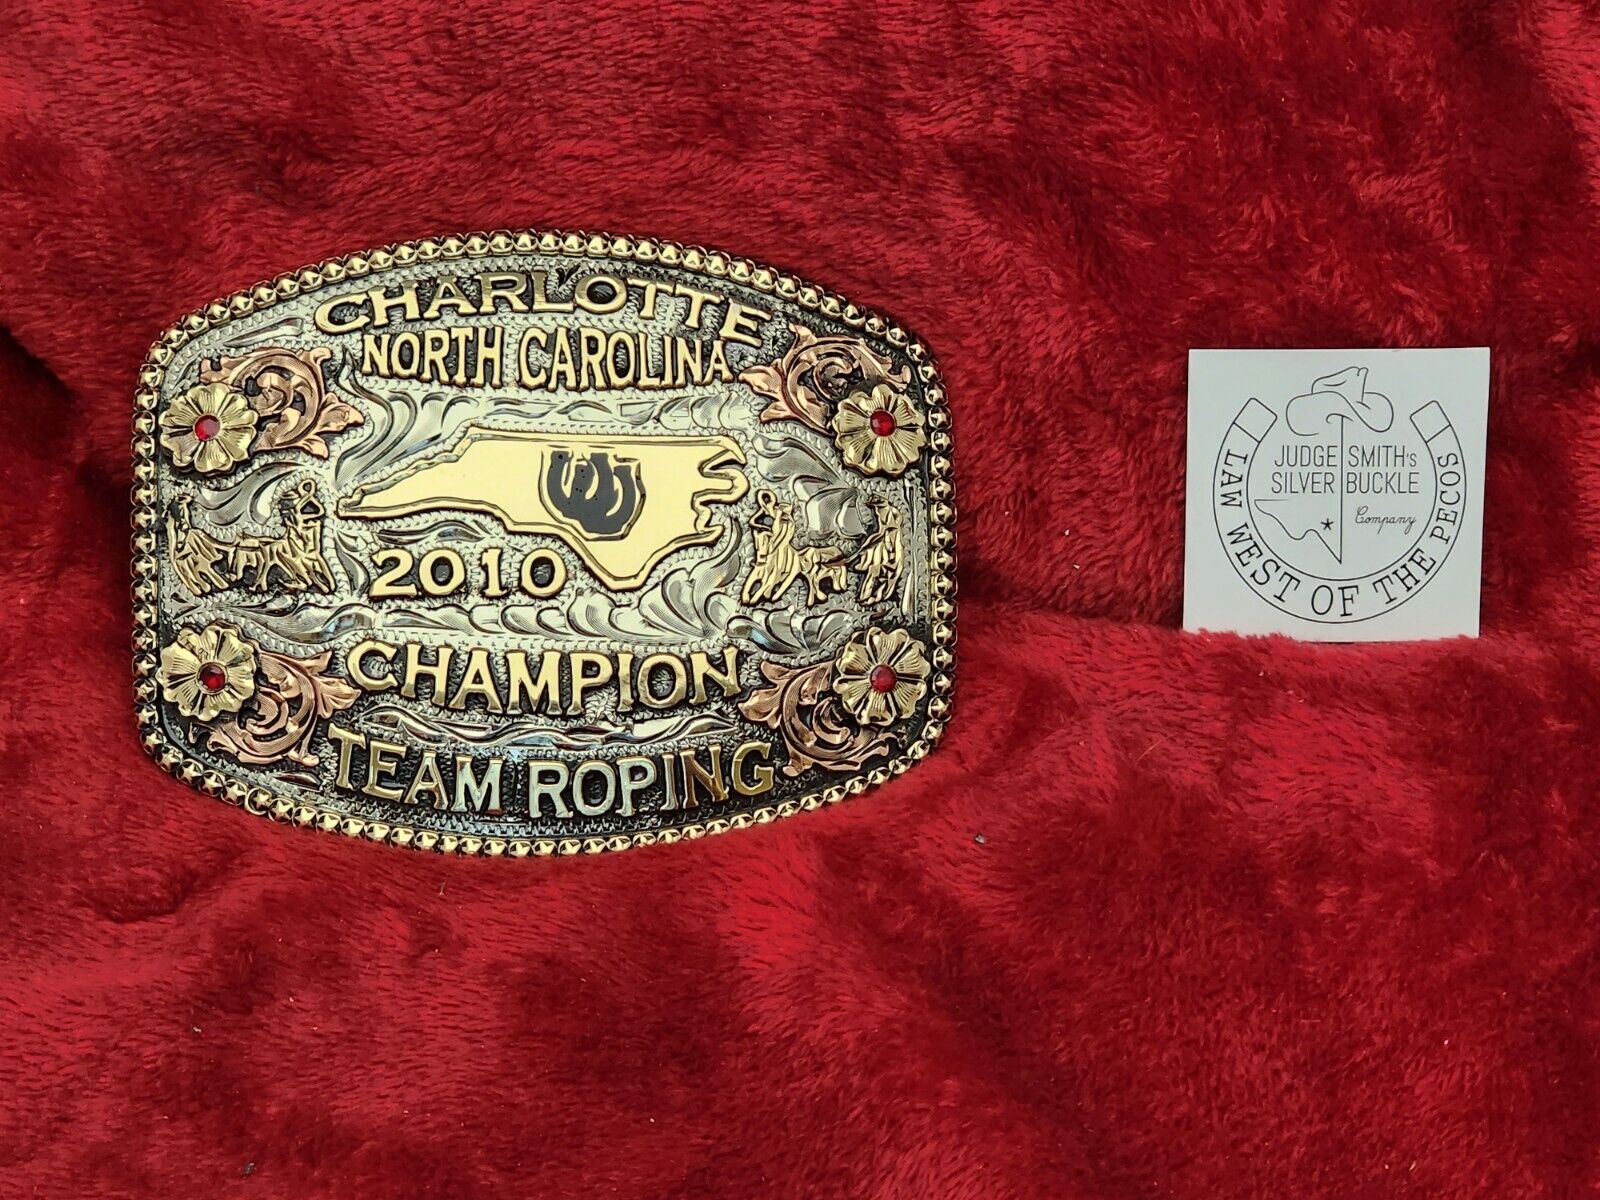 TEAM ROPING PRO RODEO CHAMPION TROPHY BUCKLE☆CHARLOTTE NORTH CAROLINA☆2010☆600